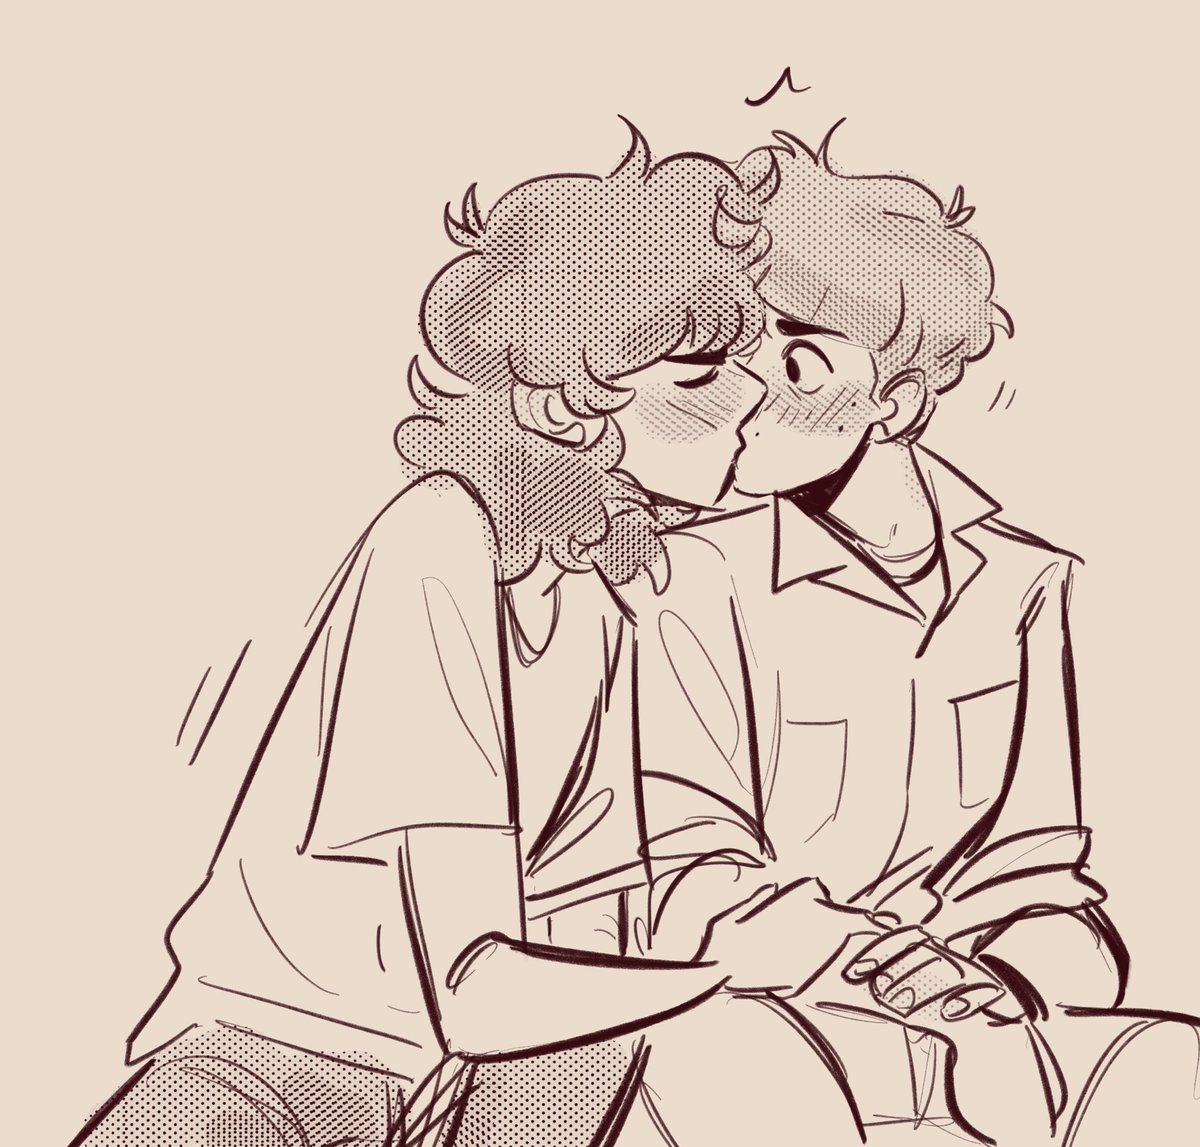 No, listen, idc, this is how it’s gonna go down #byler #StrangerThings